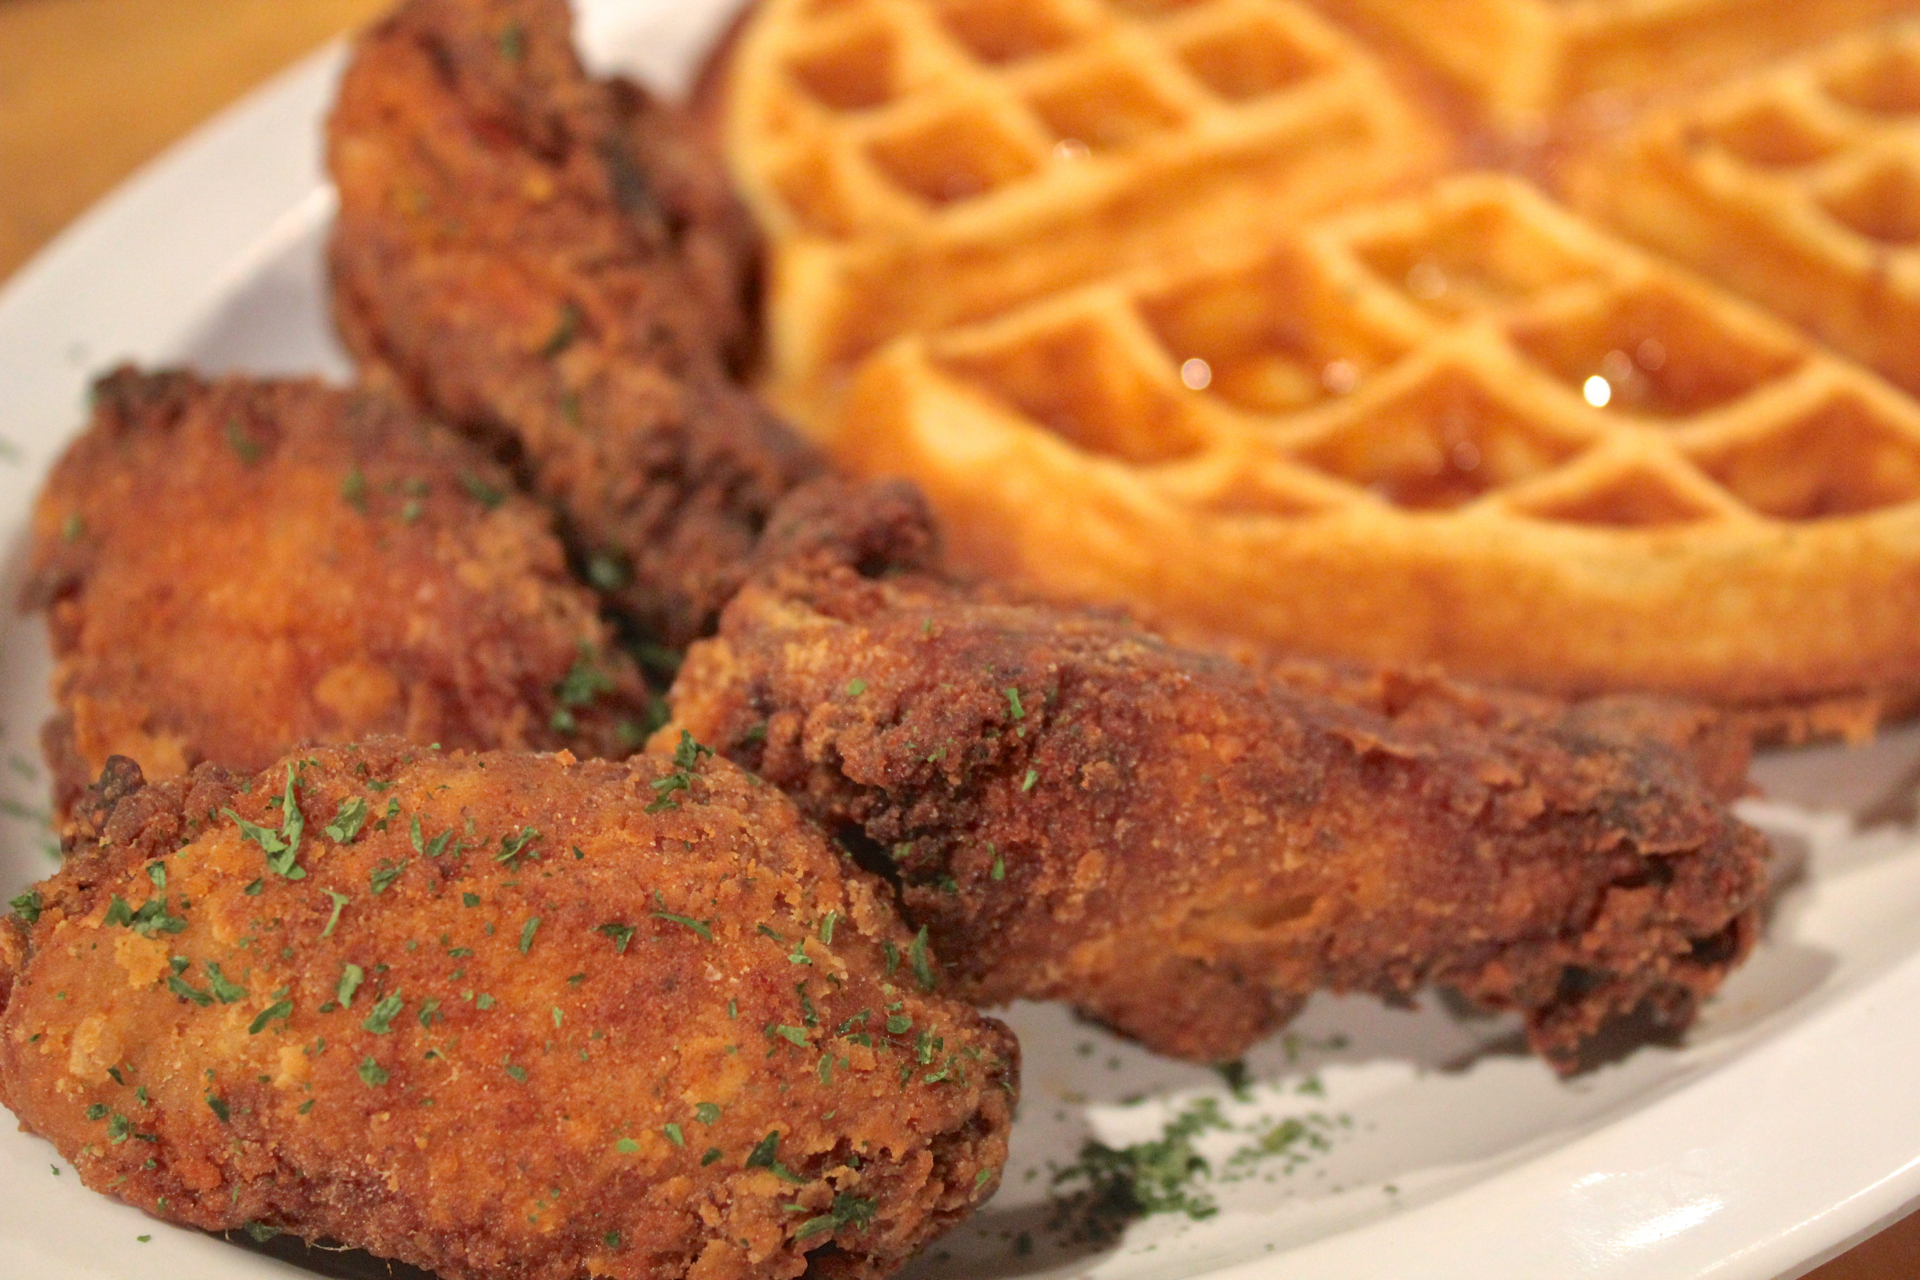 The fried chicken and waffles at Louisiana Bistro.